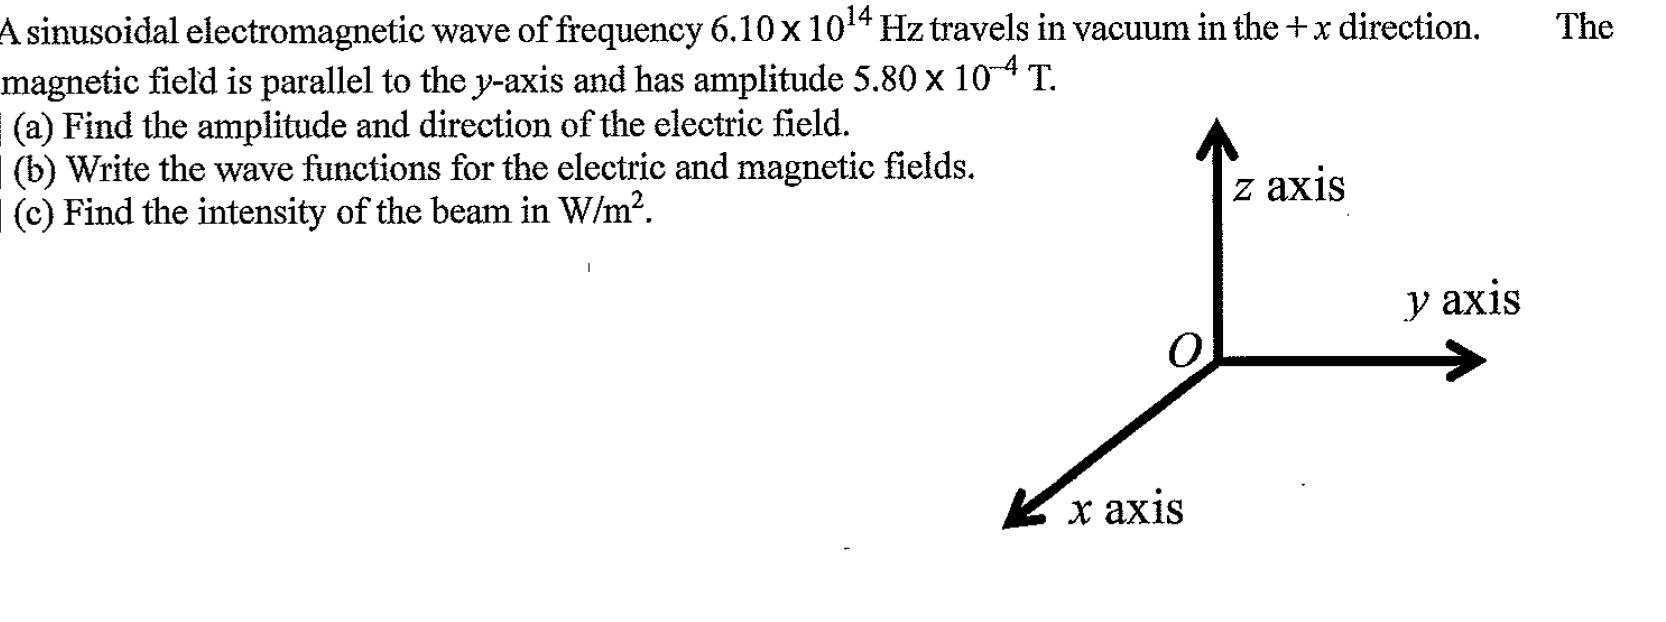 A sinusoidal electromagnetic wave of frequency 6.10x 1014 Hz travels in vacuum in the +x direction.
magnetic field is parallel to the y-axis and has amplitude 5.80 x 104 T.
(a) Find the amplitude and direction of the electric field.
(b) Write the wave functions for the electric and magnetic fields.
(c) Find the intensity of the beam in W/m?.
The
z axis
y axis
Kx axis
